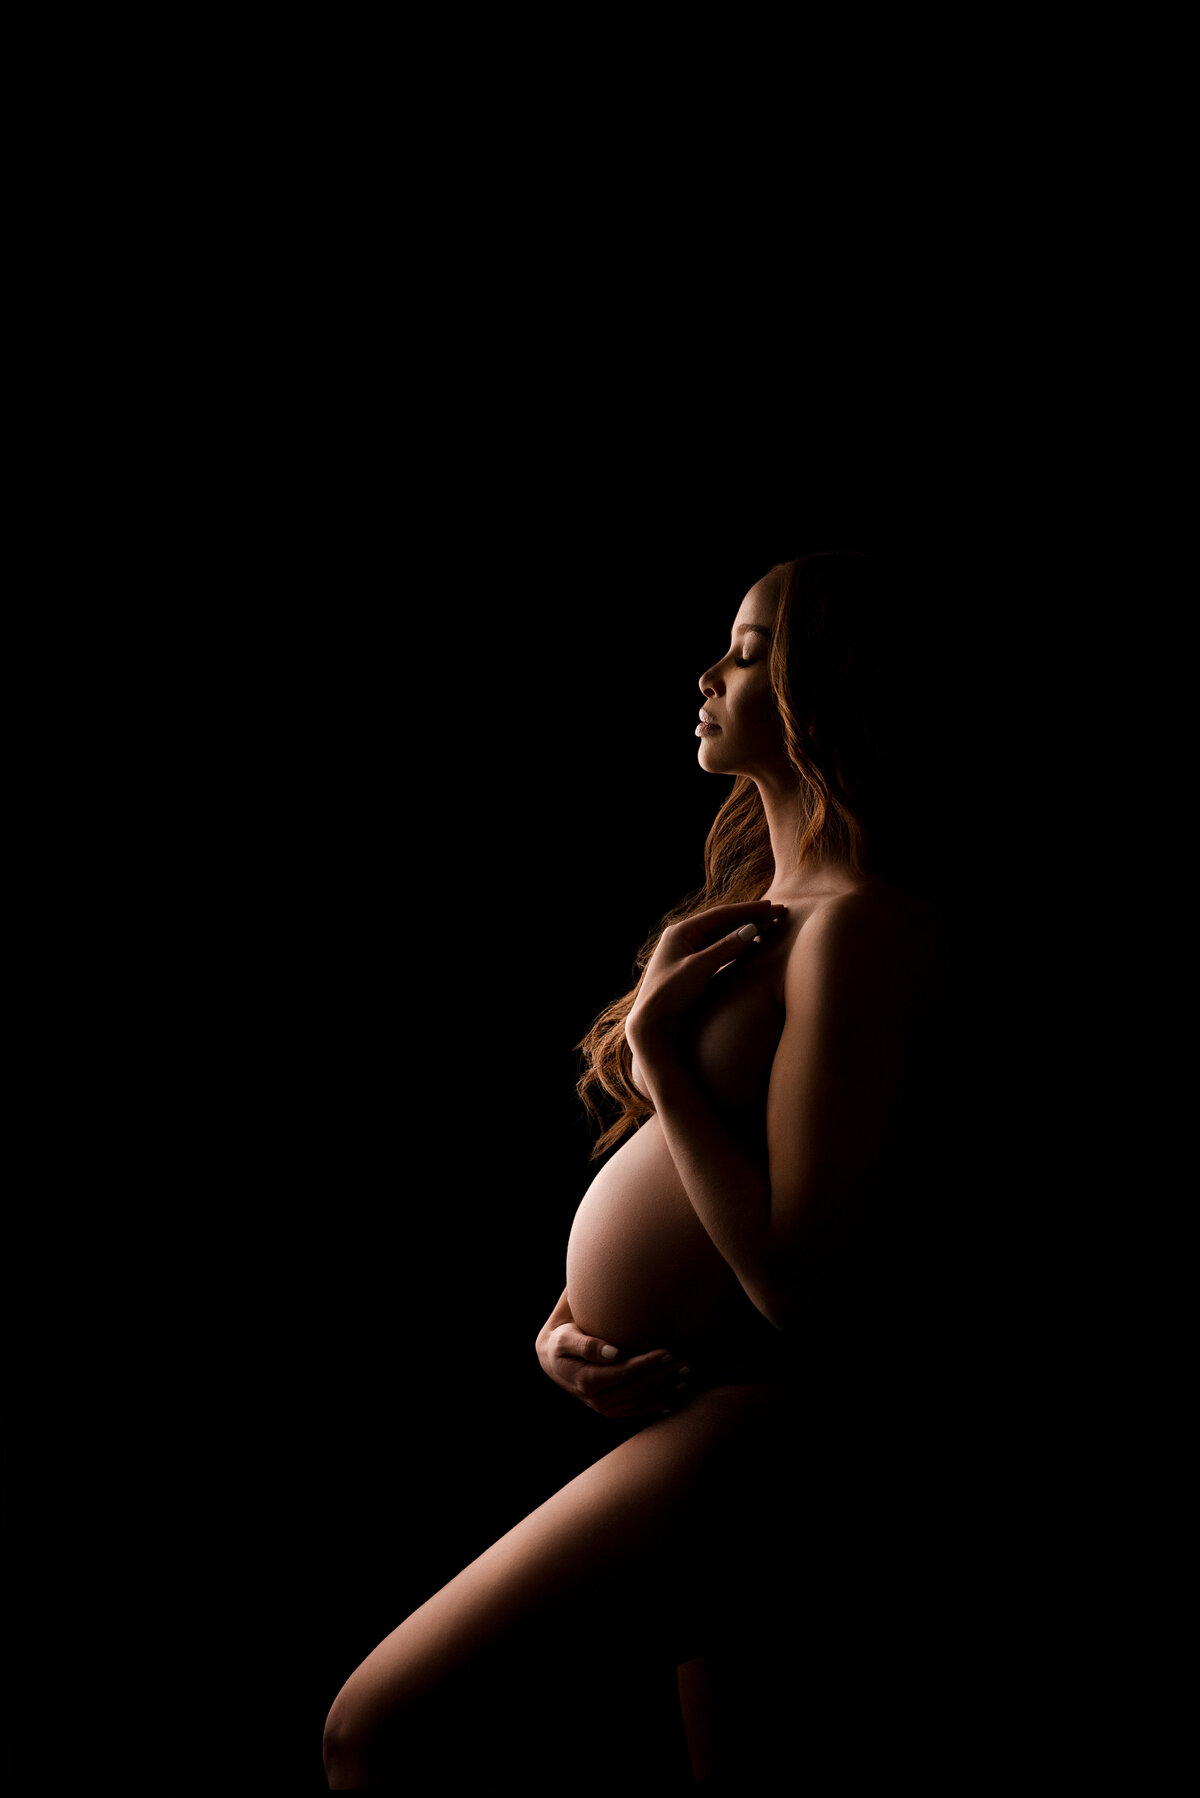 In an intimate fine art maternity photoshoot expertly captured by Katie Marshall, recognized as the best maternity photographer in New Jersey, a striking image unfolds. Here, a woman stands in elegant side profile to the camera, her front knee gracefully bent, and one hand cradling her bump while her forehand gently touches her shoulder. With closed eyes, she turns her face toward the luminous light source, casting captivating highlights and deep shadows that infuse the image with profound depth and dimension.